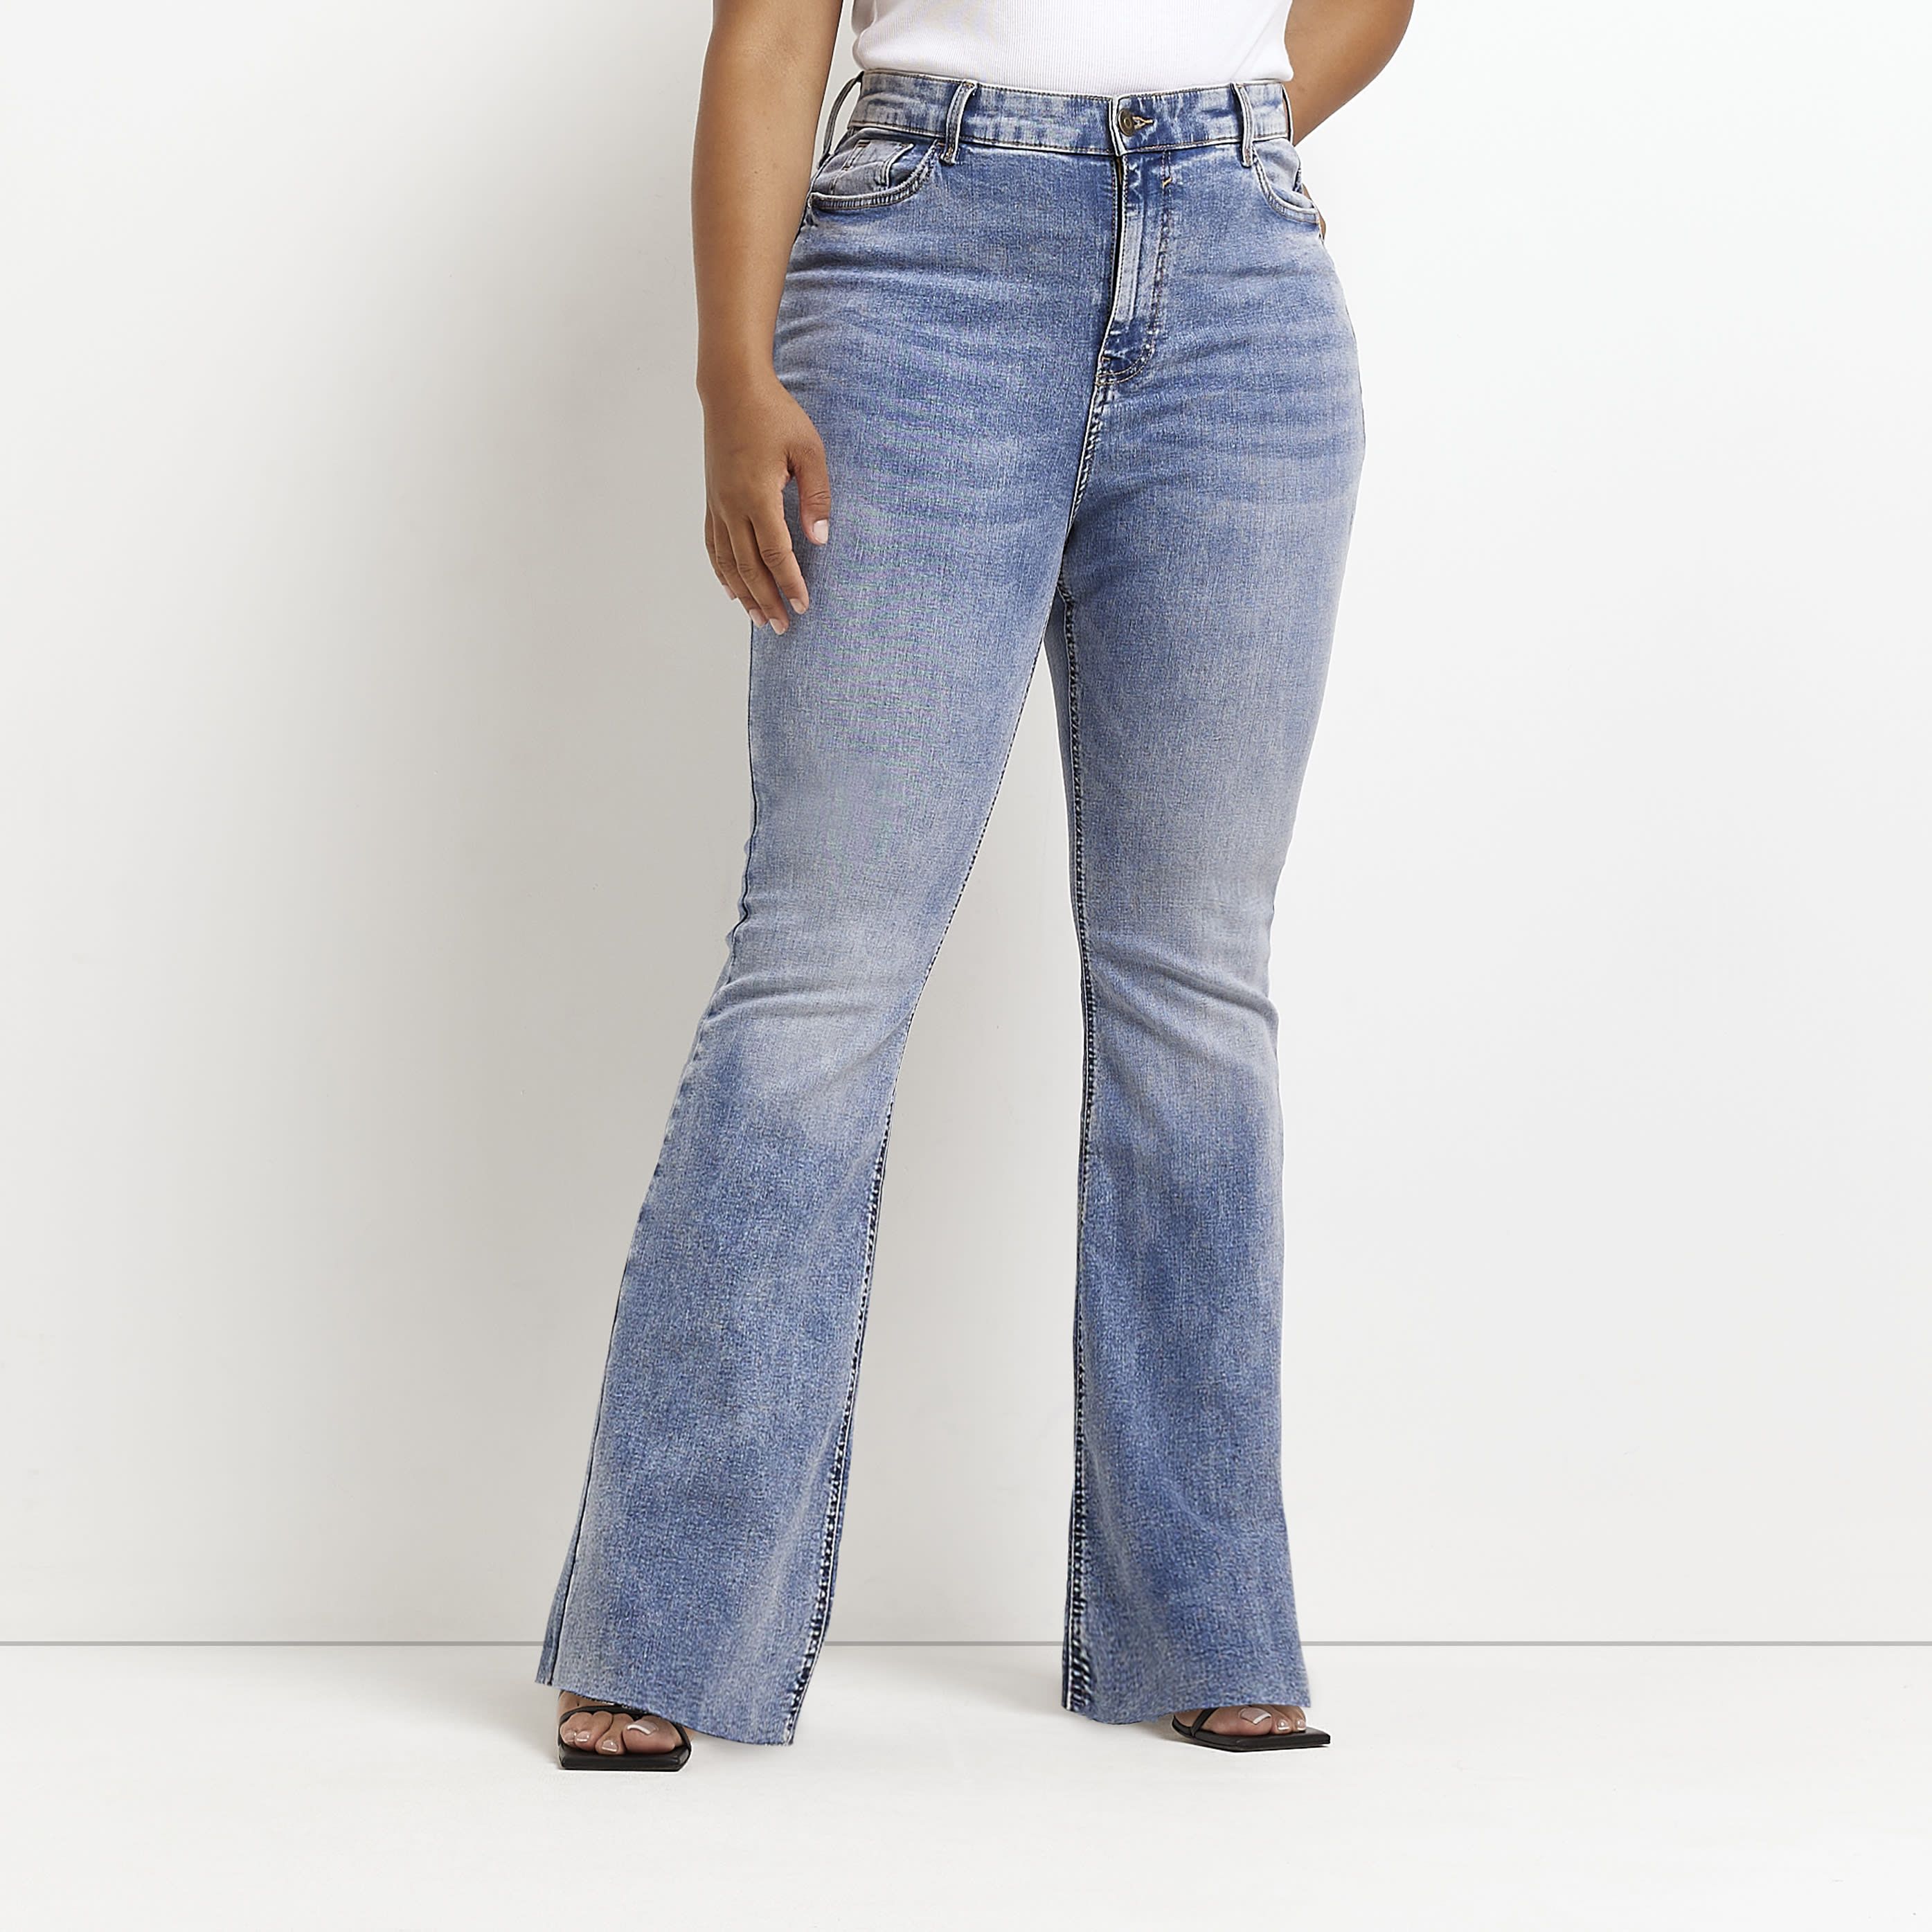 > Brand: River Island> Department: Women> Colour: Denim> Type: Jeans> Style: Straight> Size Type: Plus> Fit: Regular> Material Composition: 89% Cotton 10% Polyester 1% Elastane> Occasion: Casual> Pattern: No Pattern> Closure: Button> Material: Cotton Blend> Rise: High (Greater than 10.5 in)> Season: AW22